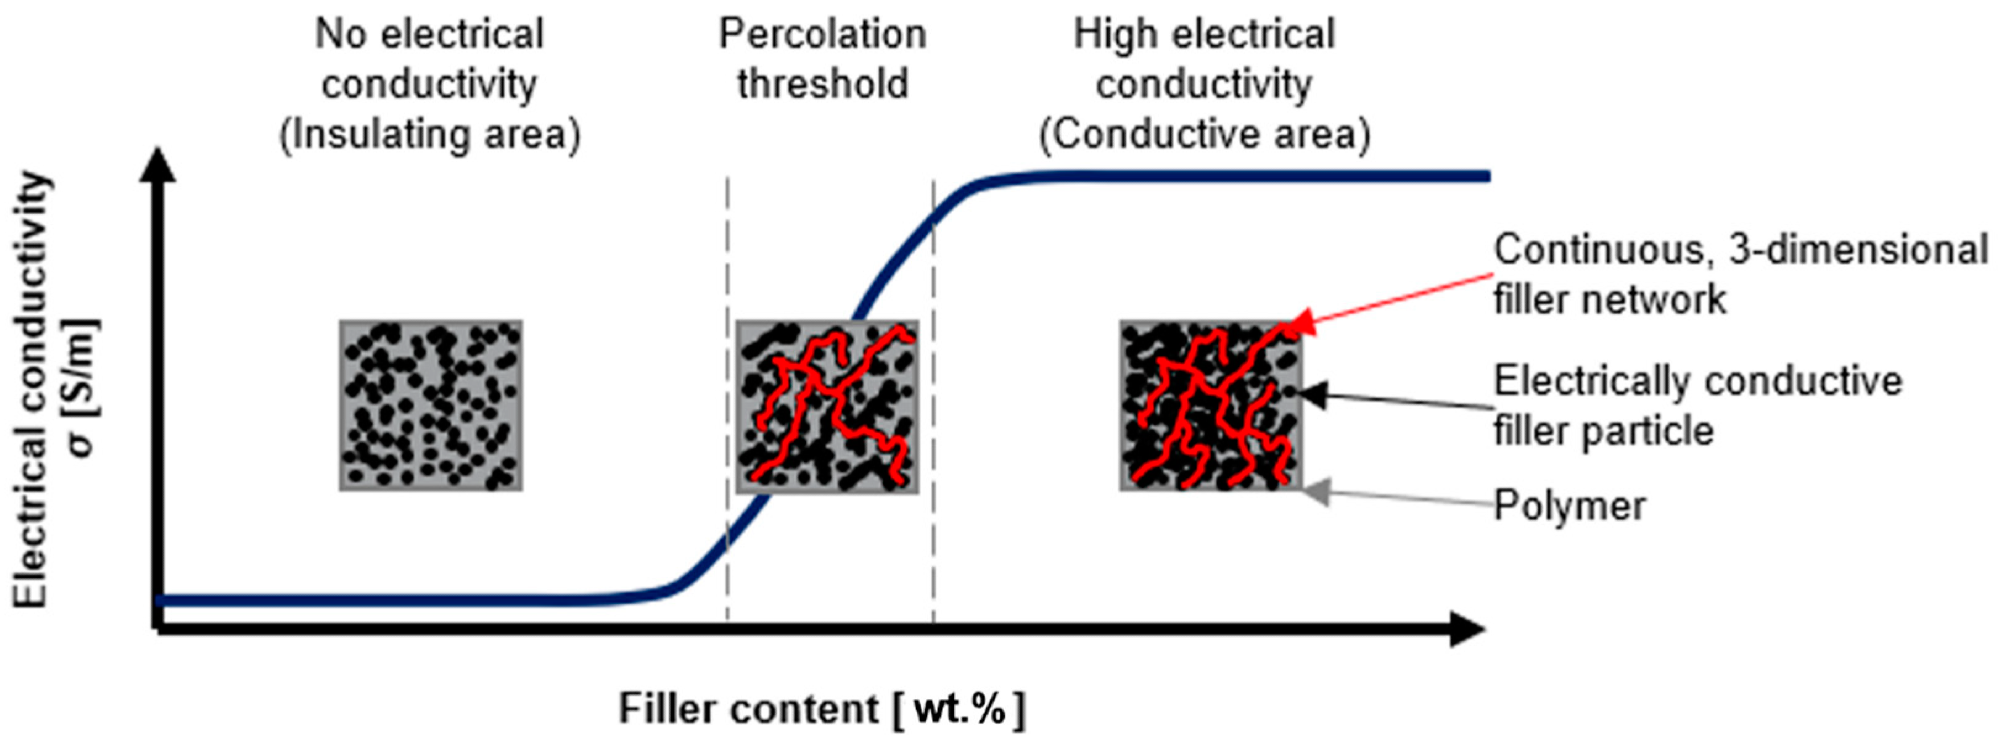 Schematic representation of the electrically conductive filler network within the non-conductive polymer [17,18].